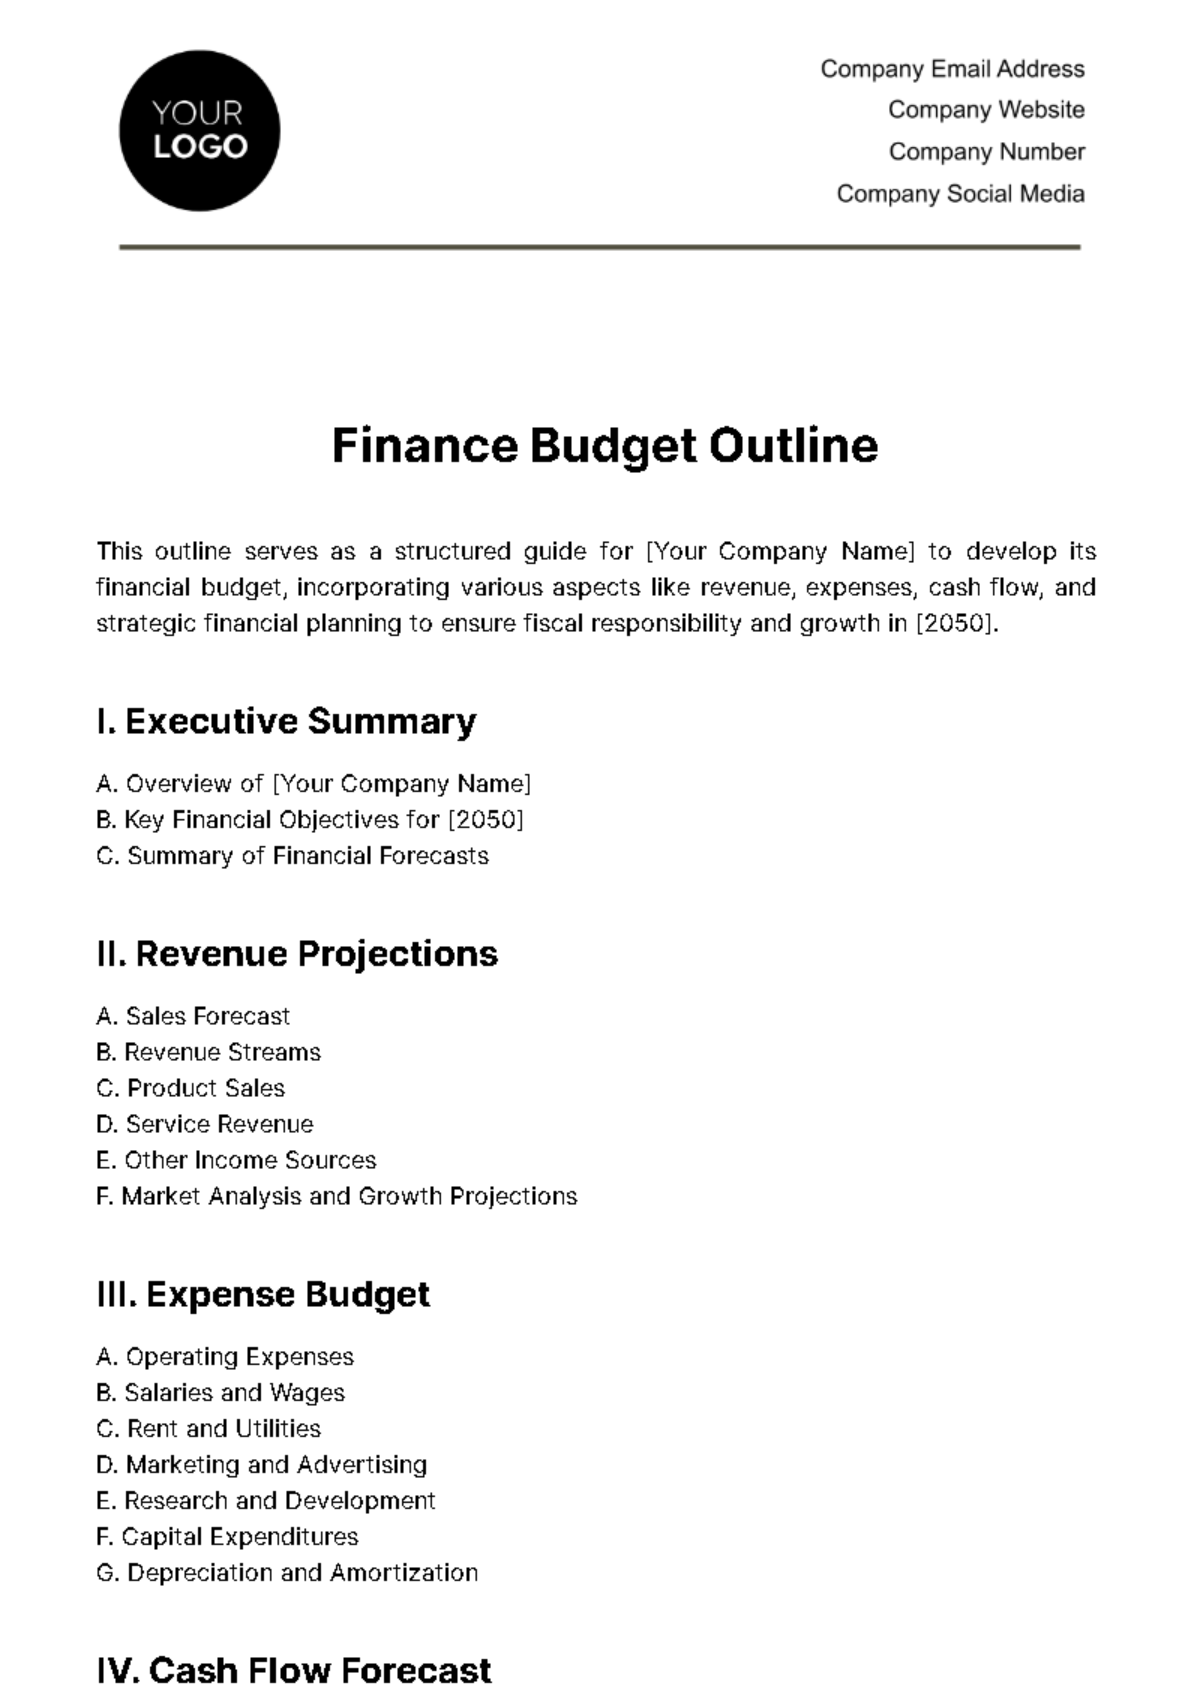 Free Finance Budget Outline Template